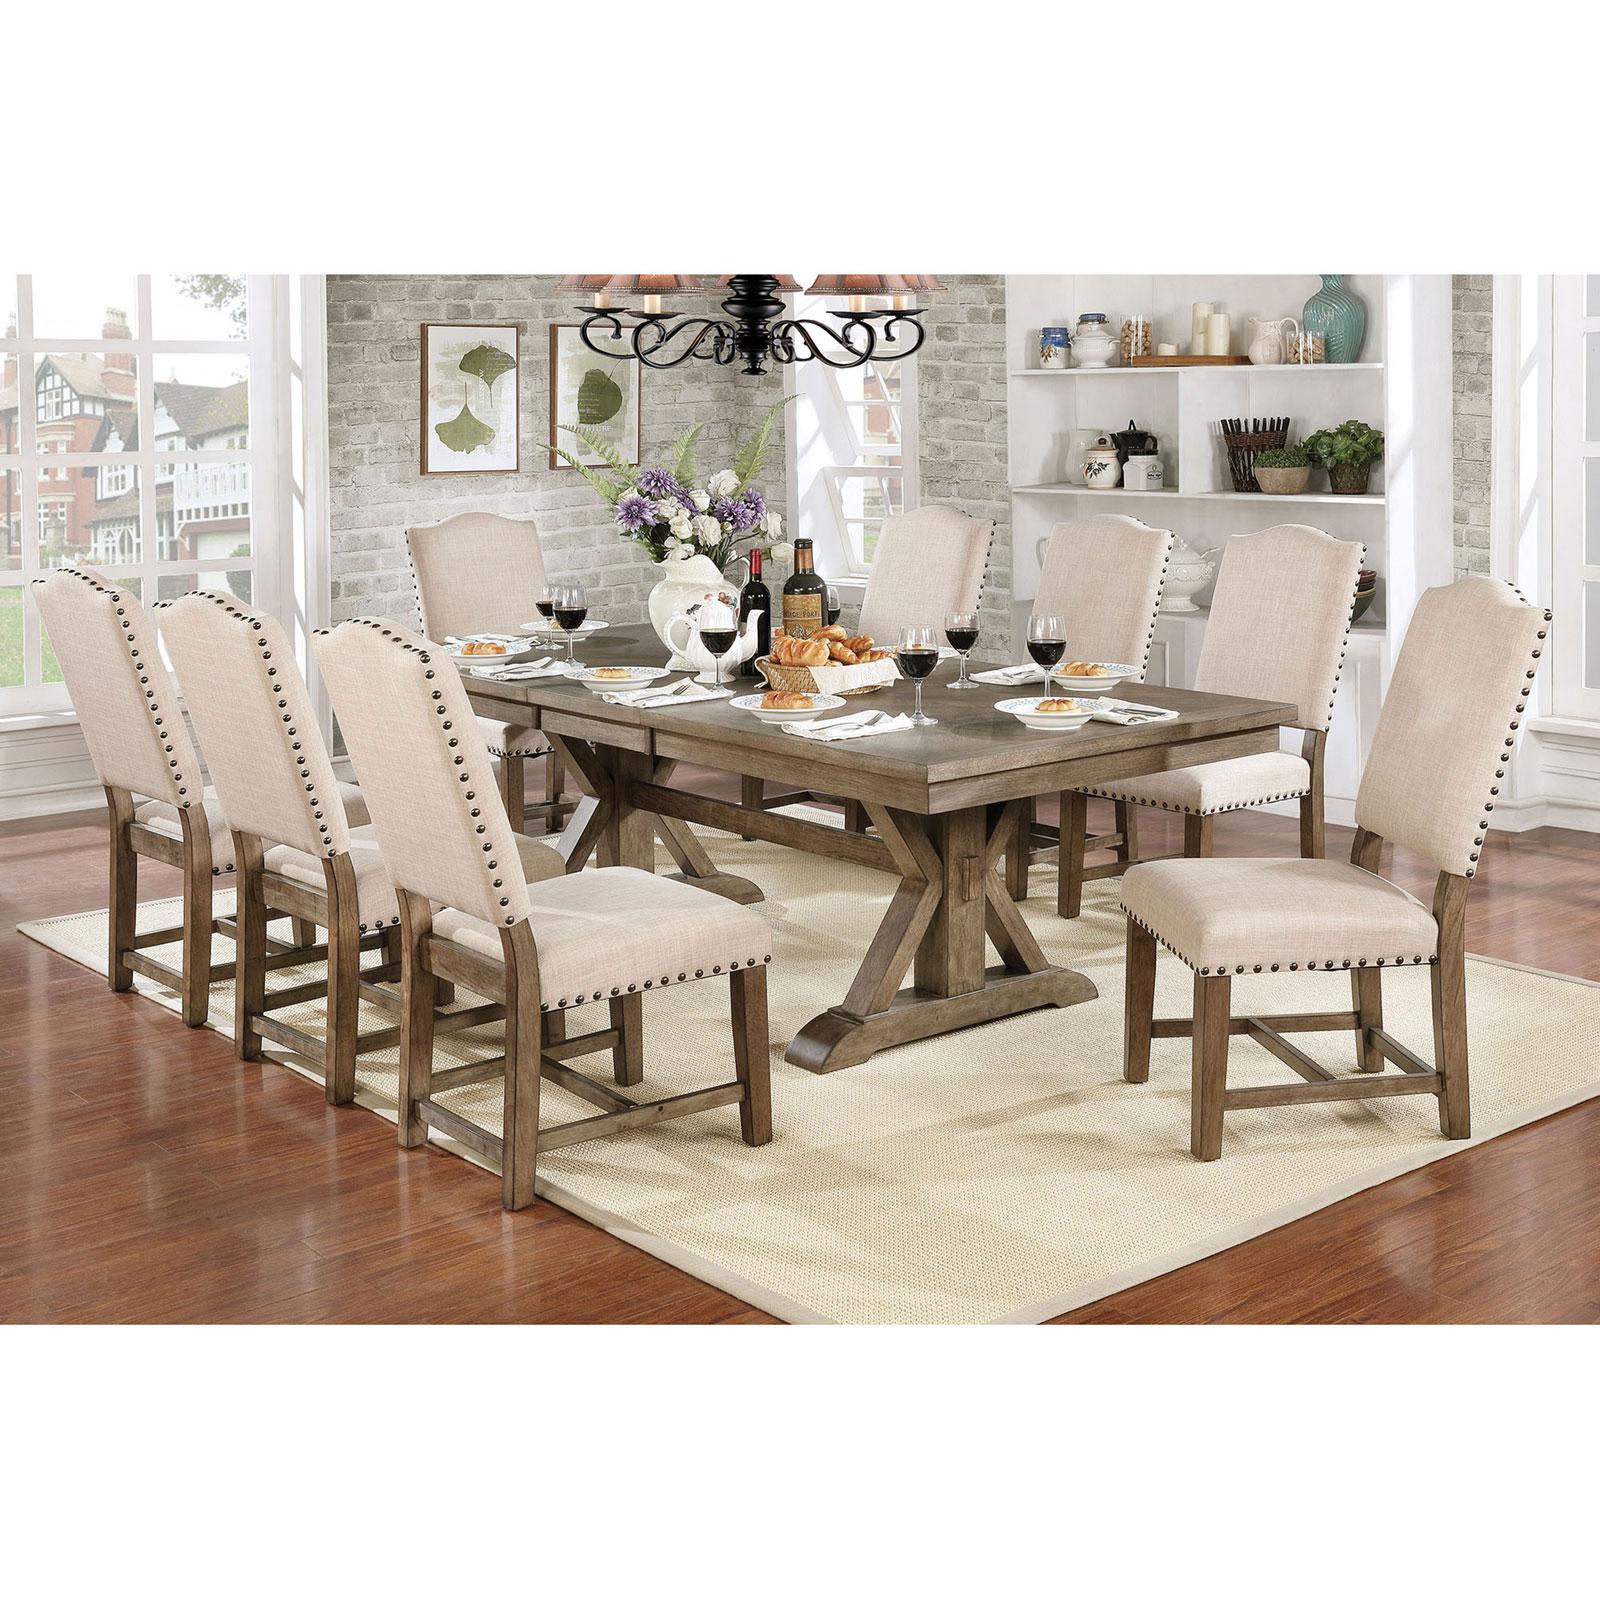 Rustic Dining Table JULIA CM3014T CM3014T in Brown 